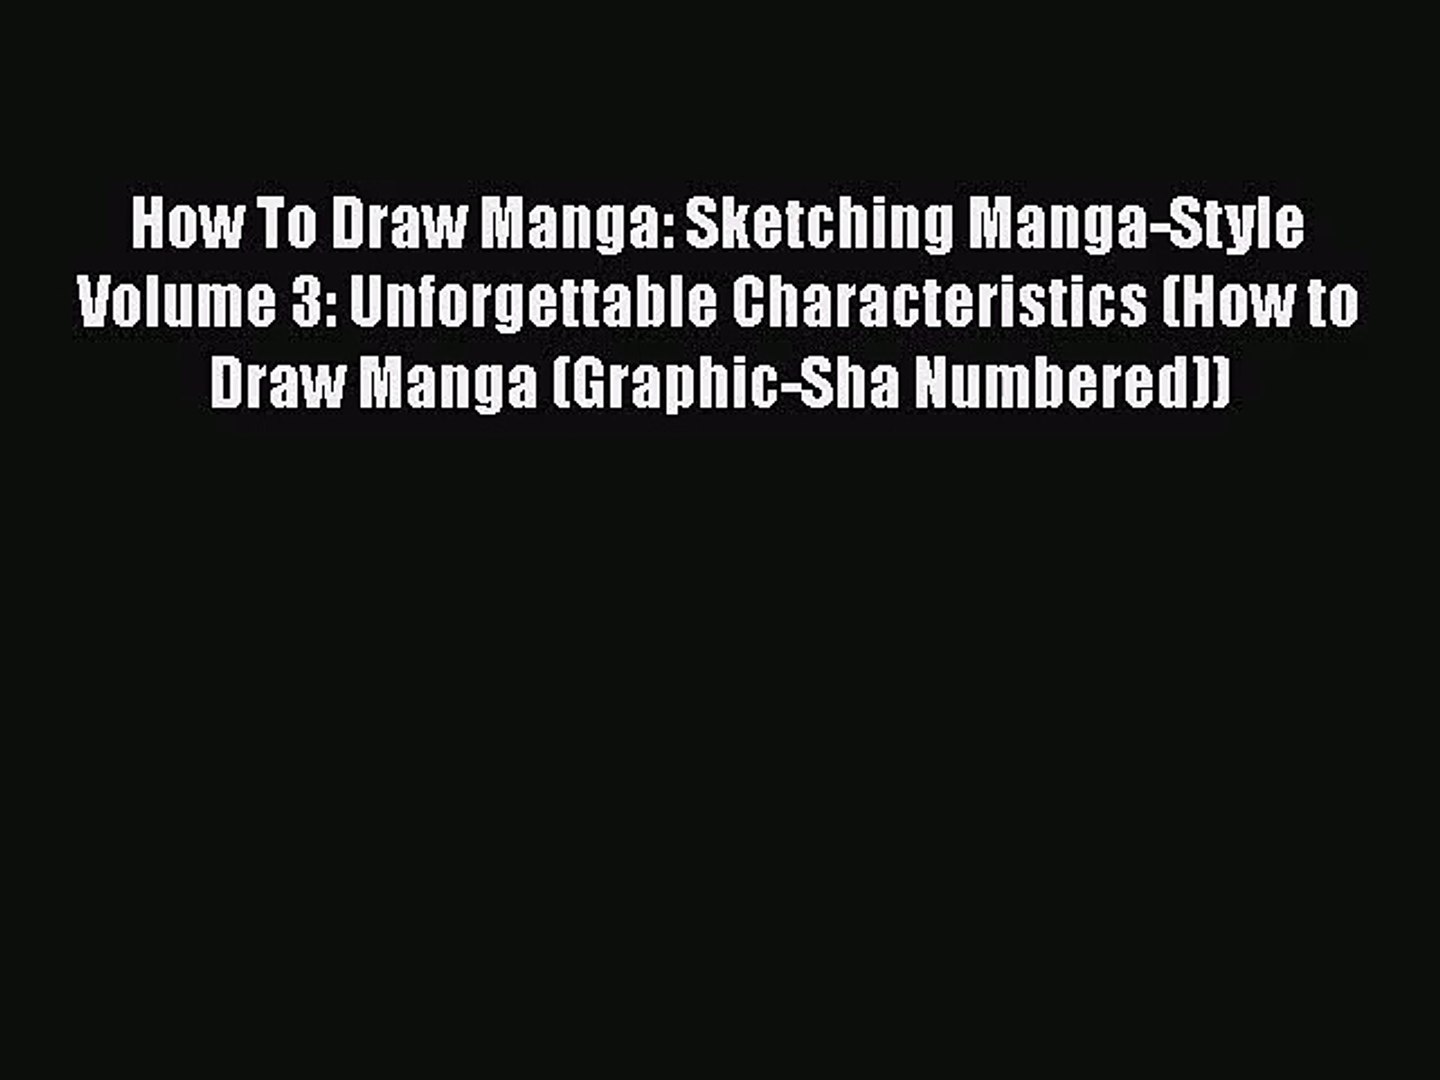 How To Draw Manga: Sketching Manga-Style Volume 3: Unforgettable Characteristics (How to Draw